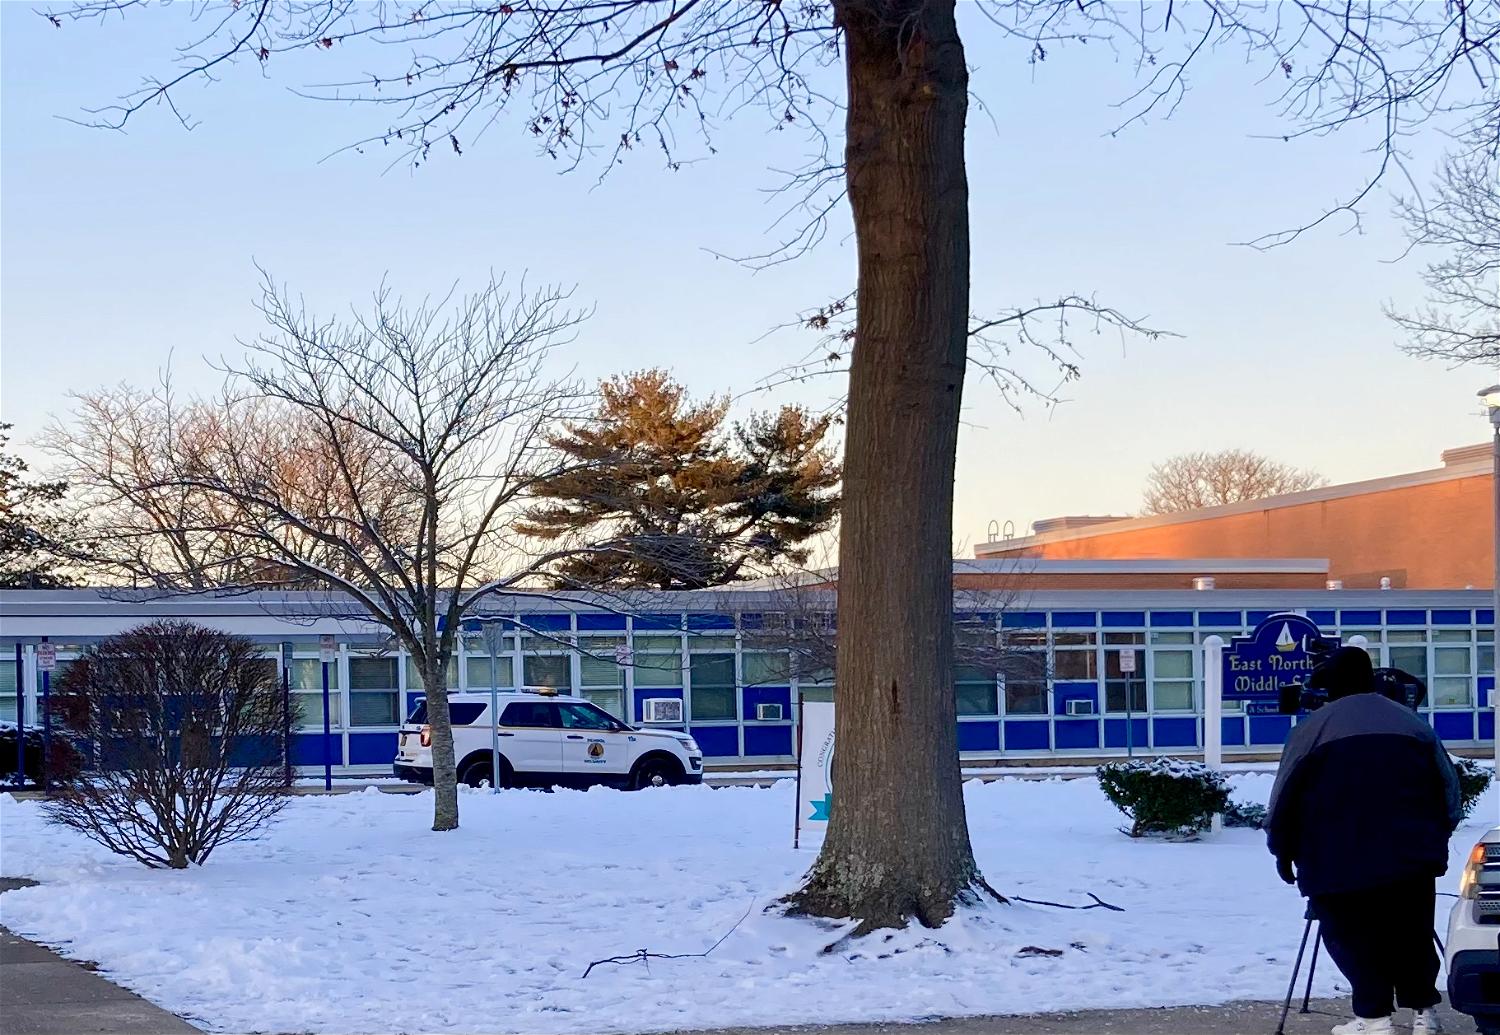 A News12 cameraman sets up outside East Northport Middle School where, earlier in the day, a student was removed from class for making a threat against the school on SnapChat.  